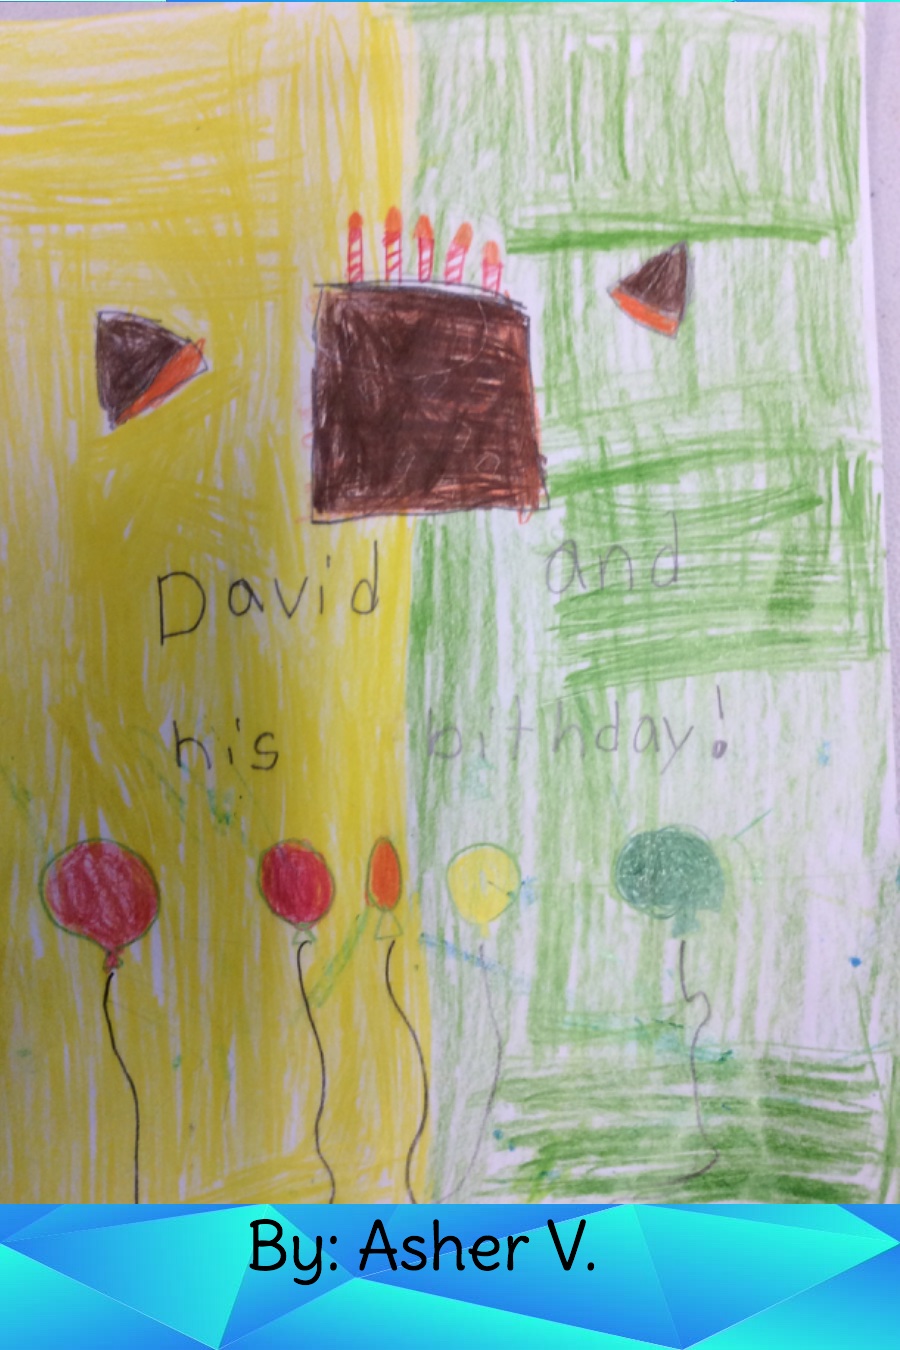 David and His Birthday by Asher V